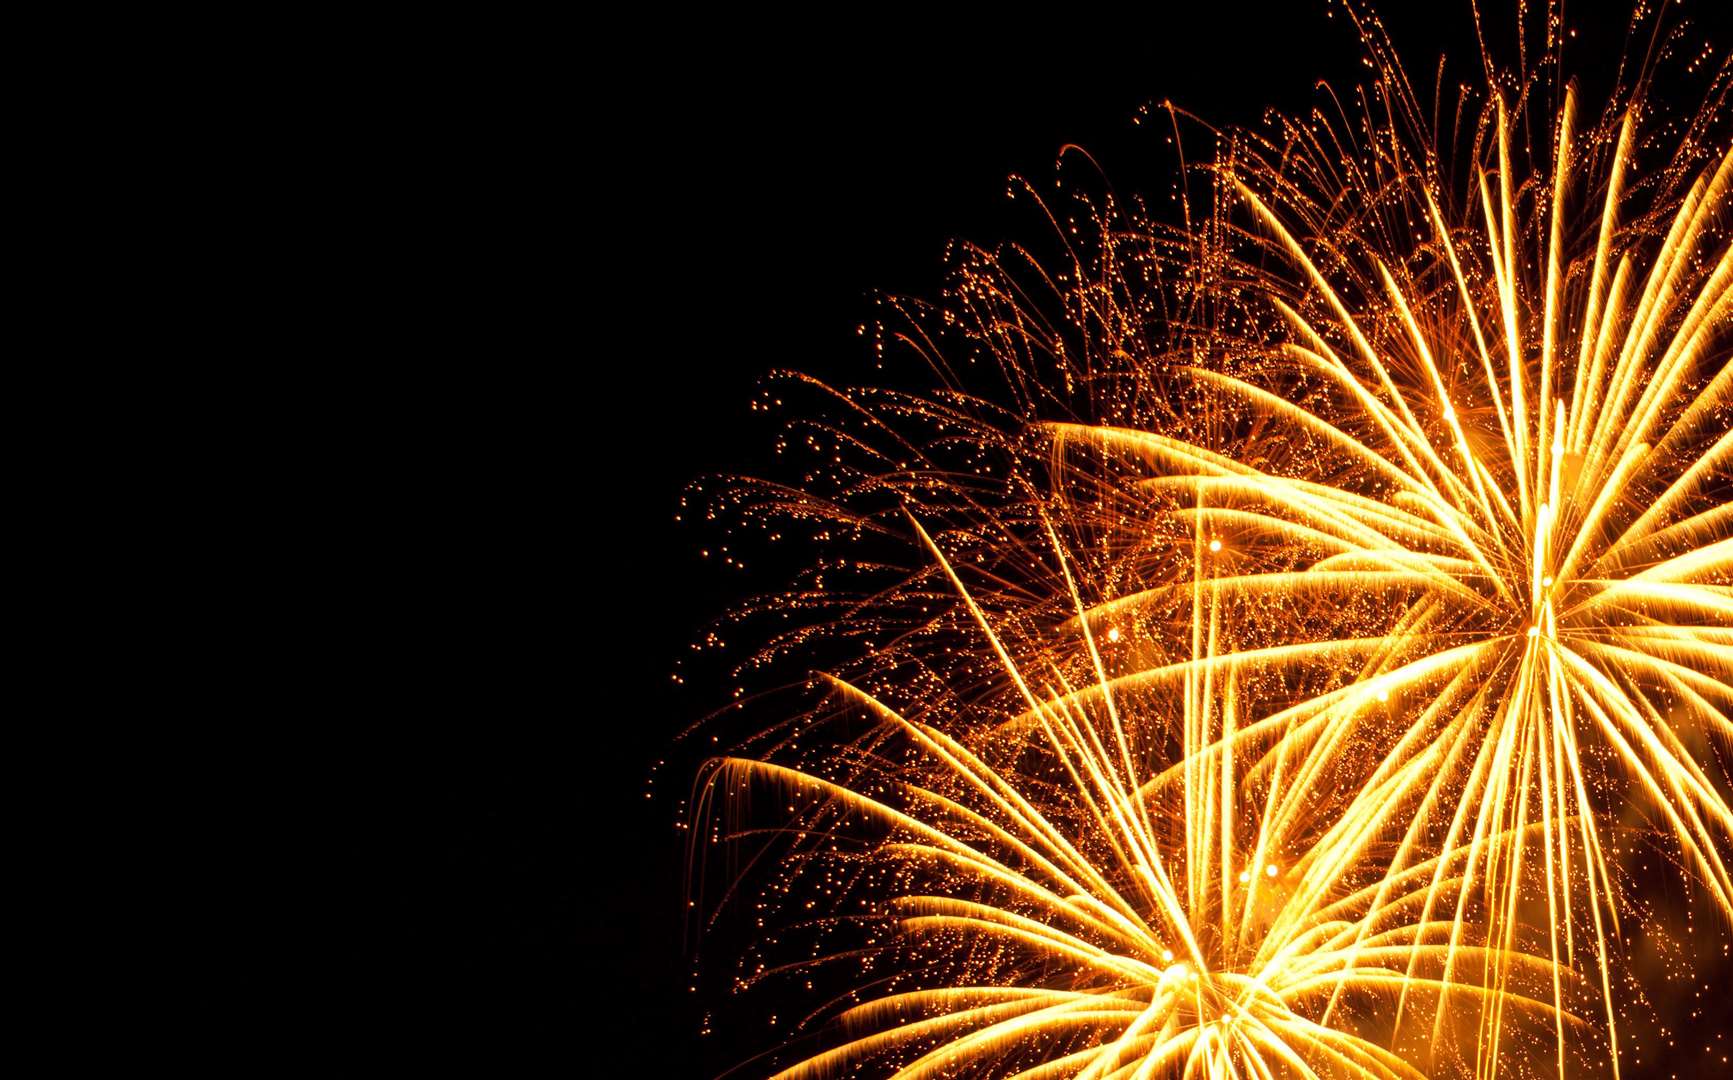 Here is all you need to know about firework displays in the area this bonfire season. Stock image